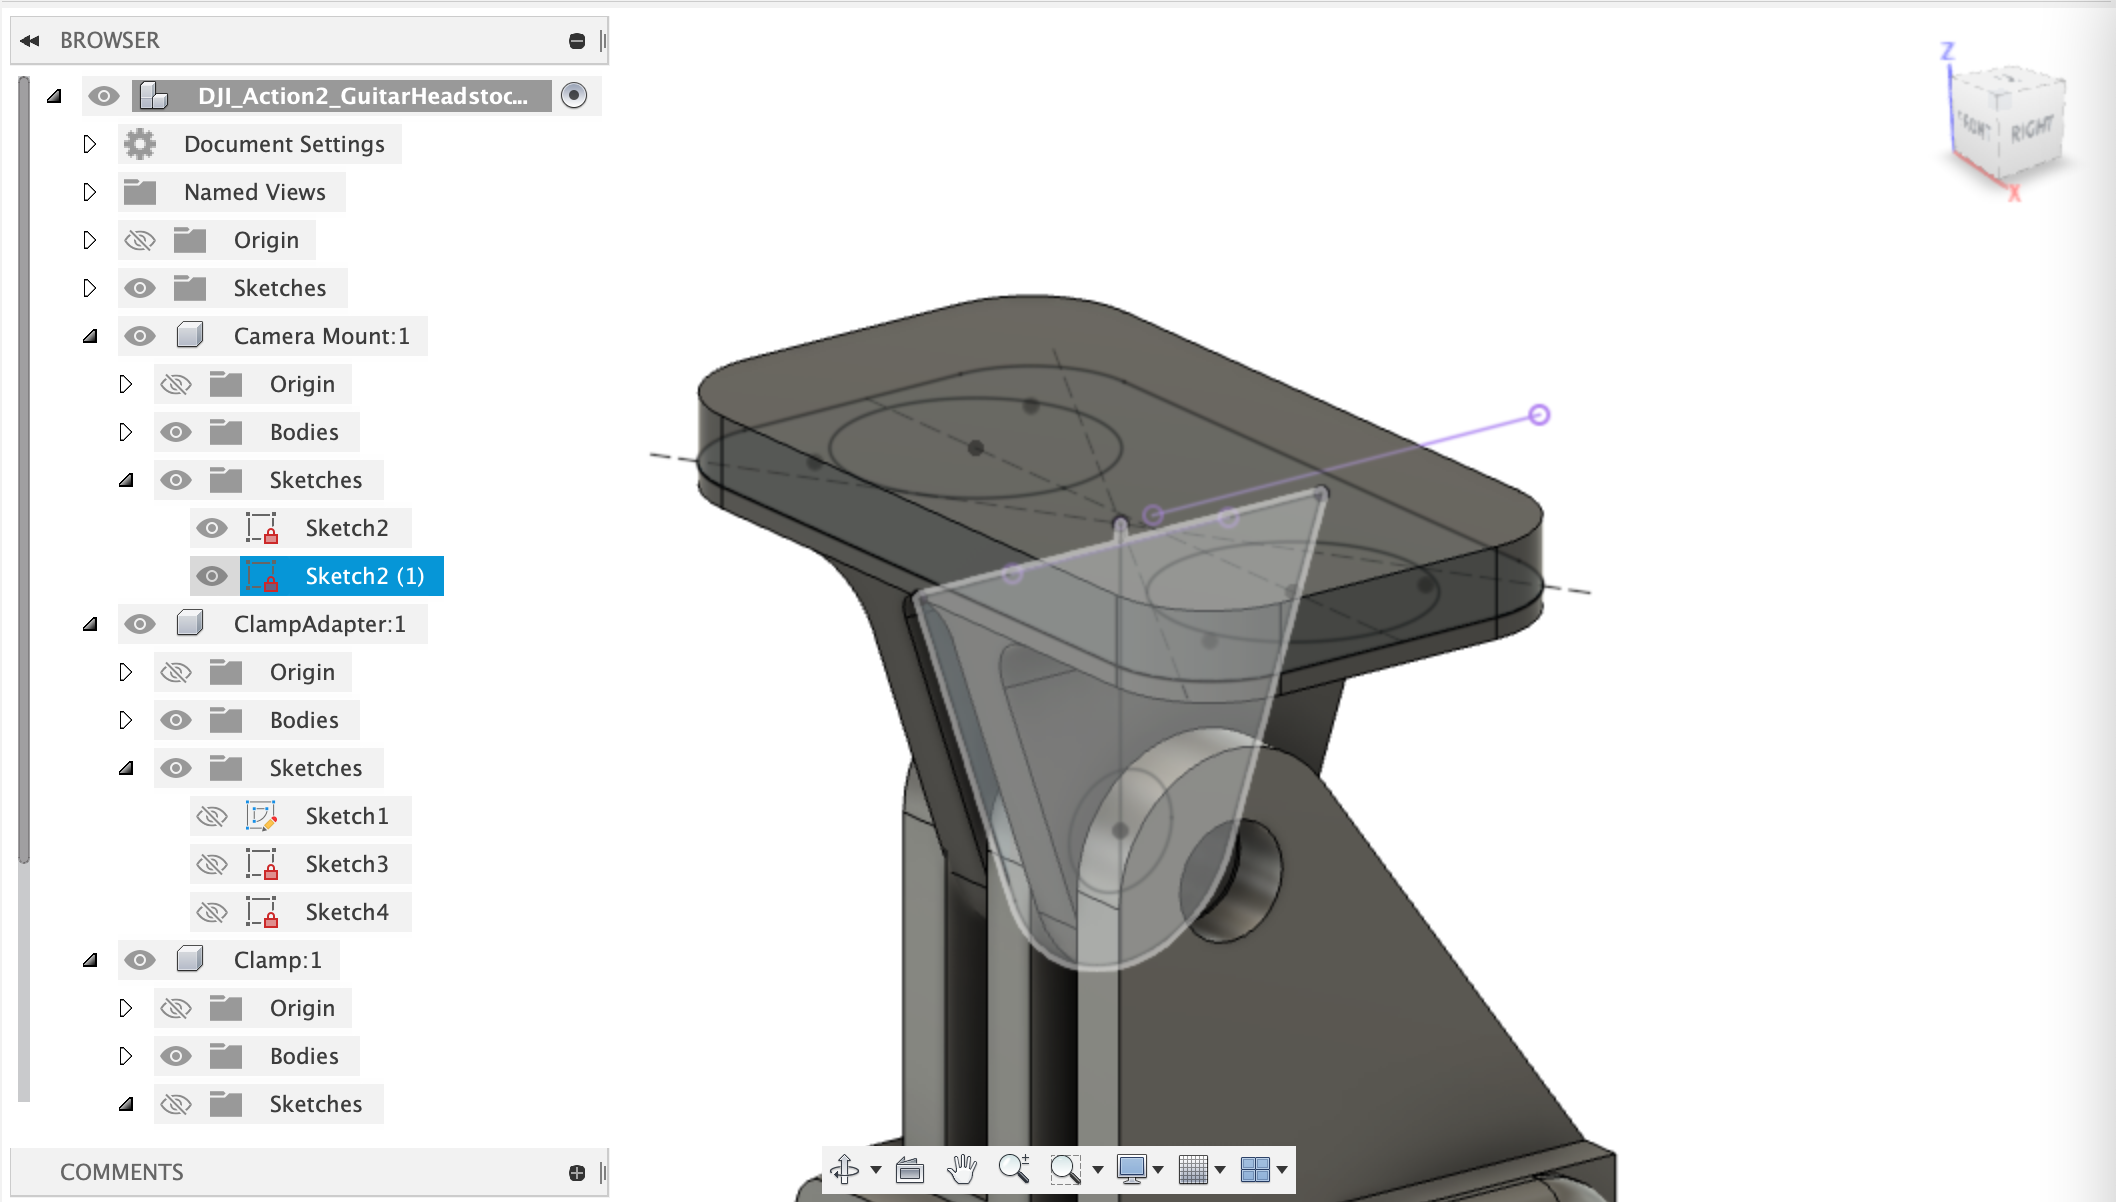 Screenshot of Autodesk Fusion 360 showing multiple sketches, some enabled and some disabled in the filter